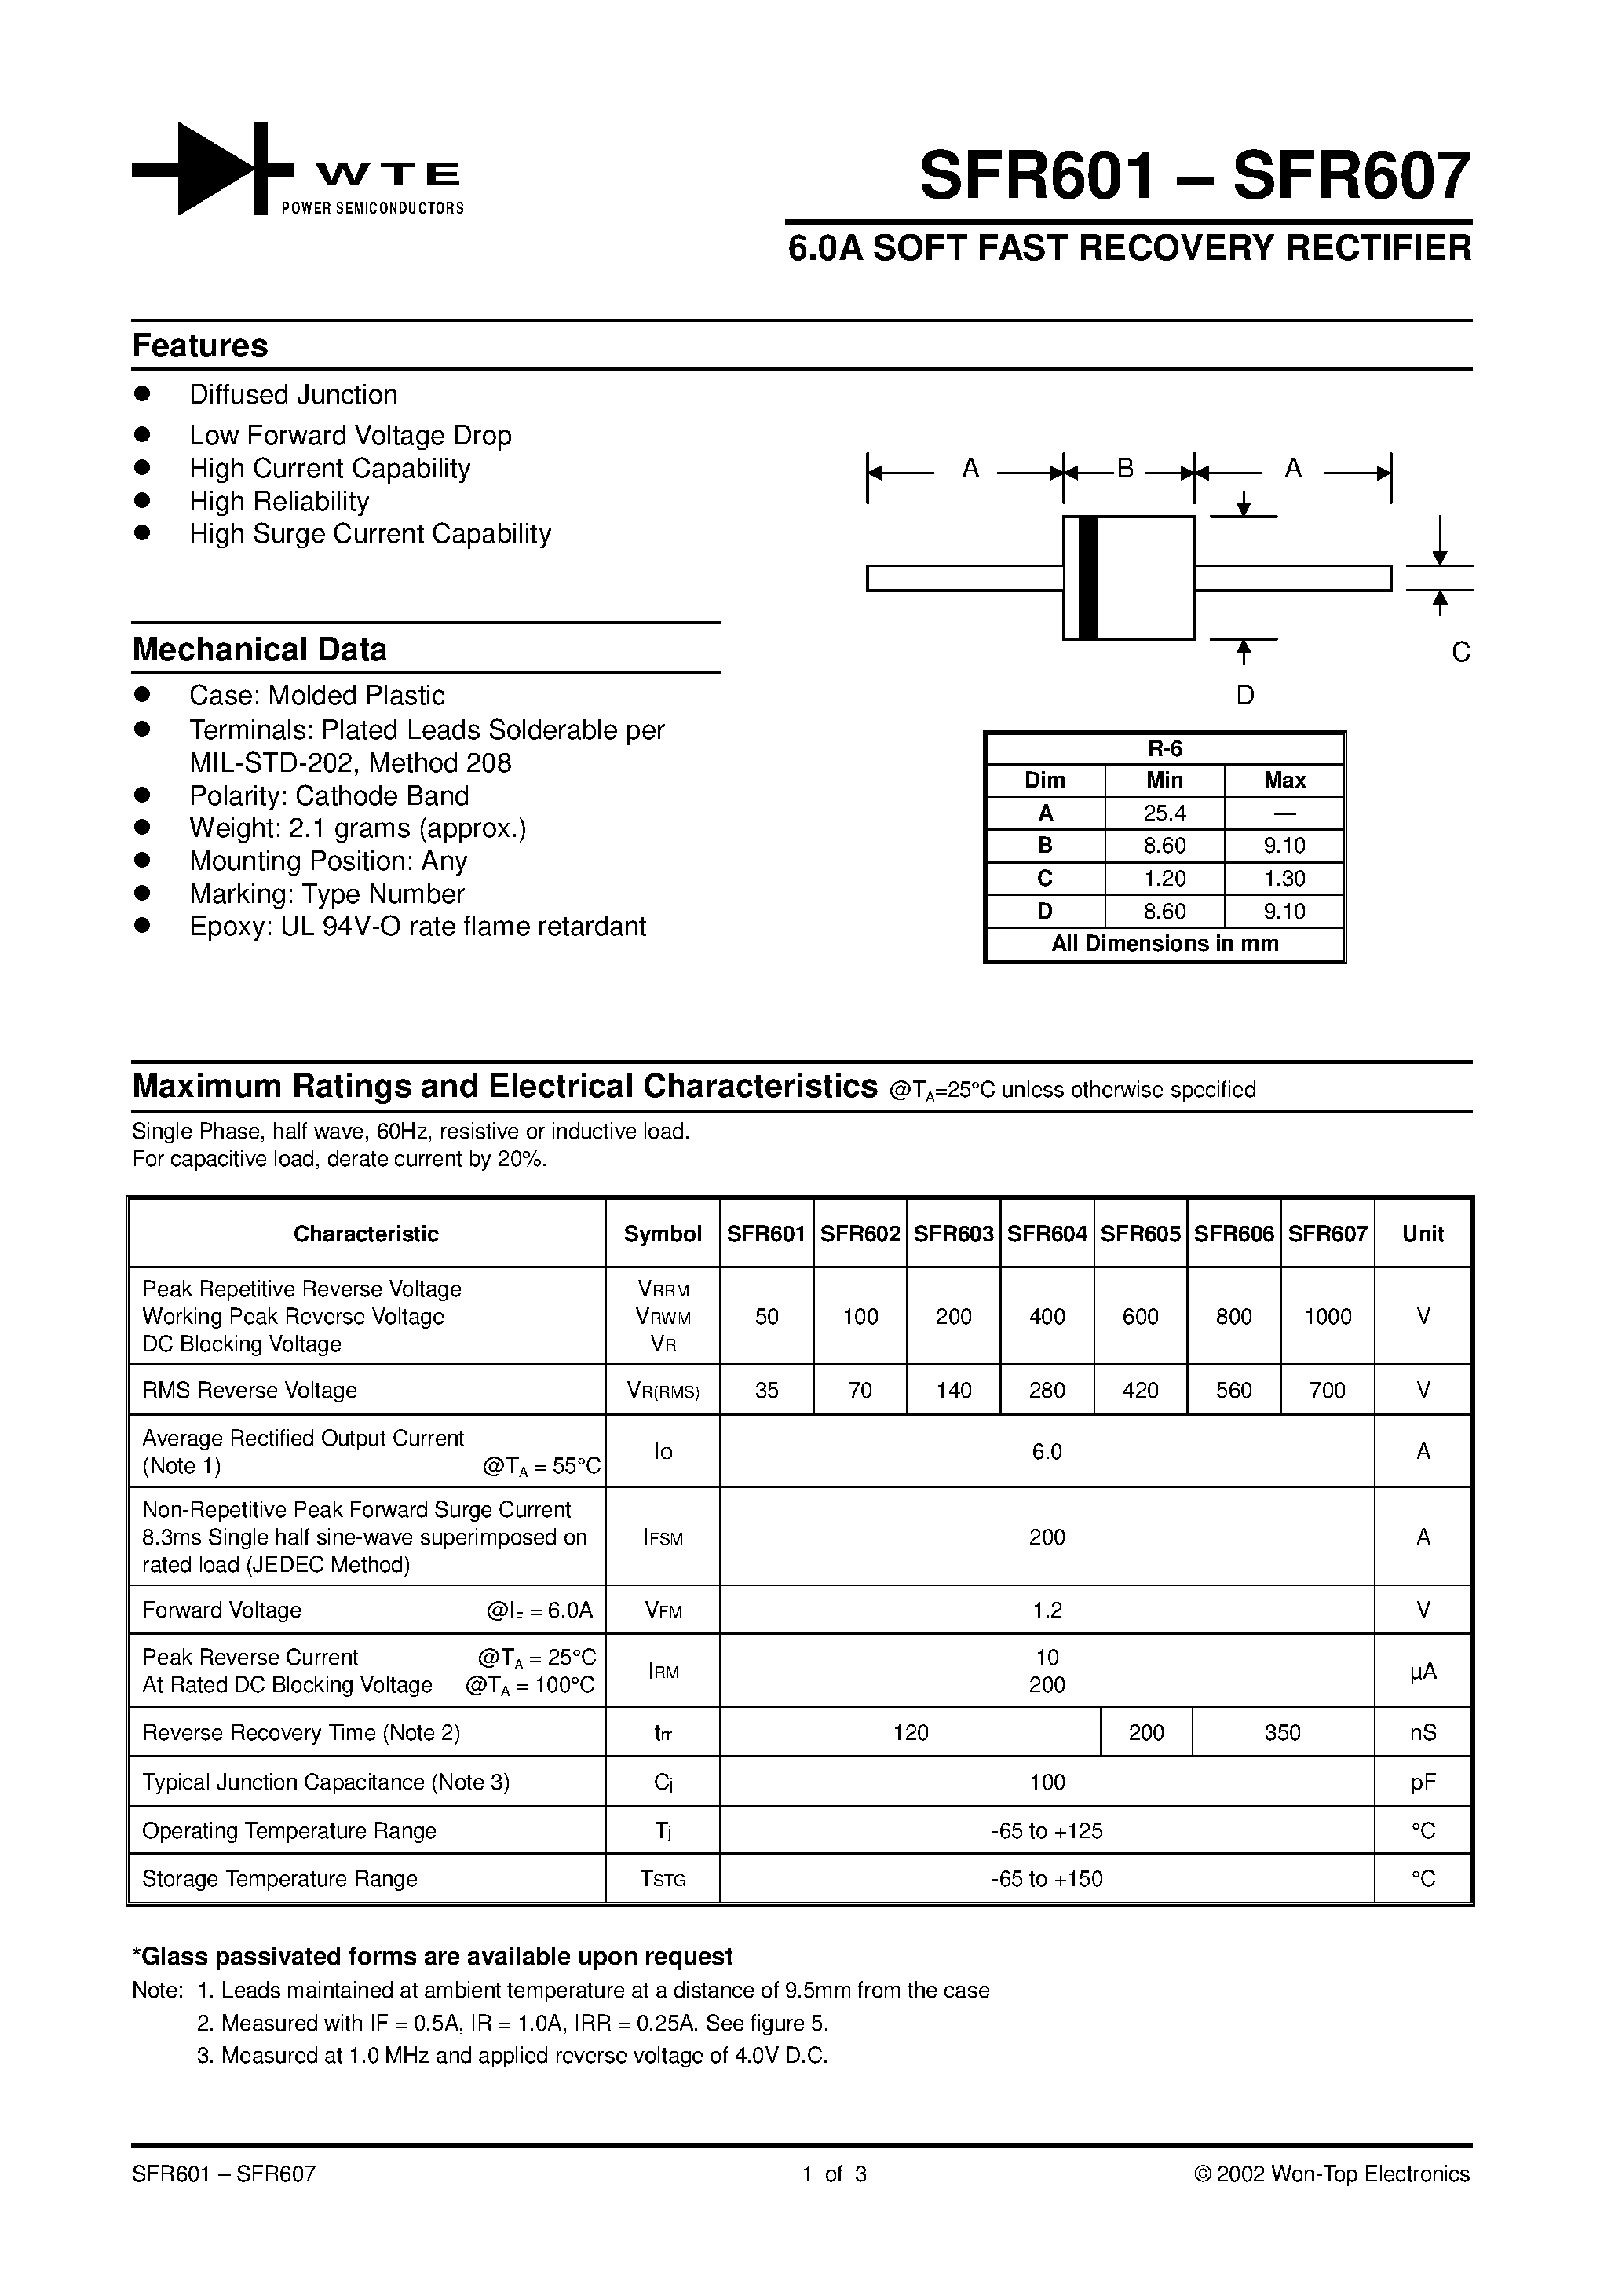 Datasheet SFR605-T3 - 6.0A SOFT FAST RECOVERY RECTIFIER page 1